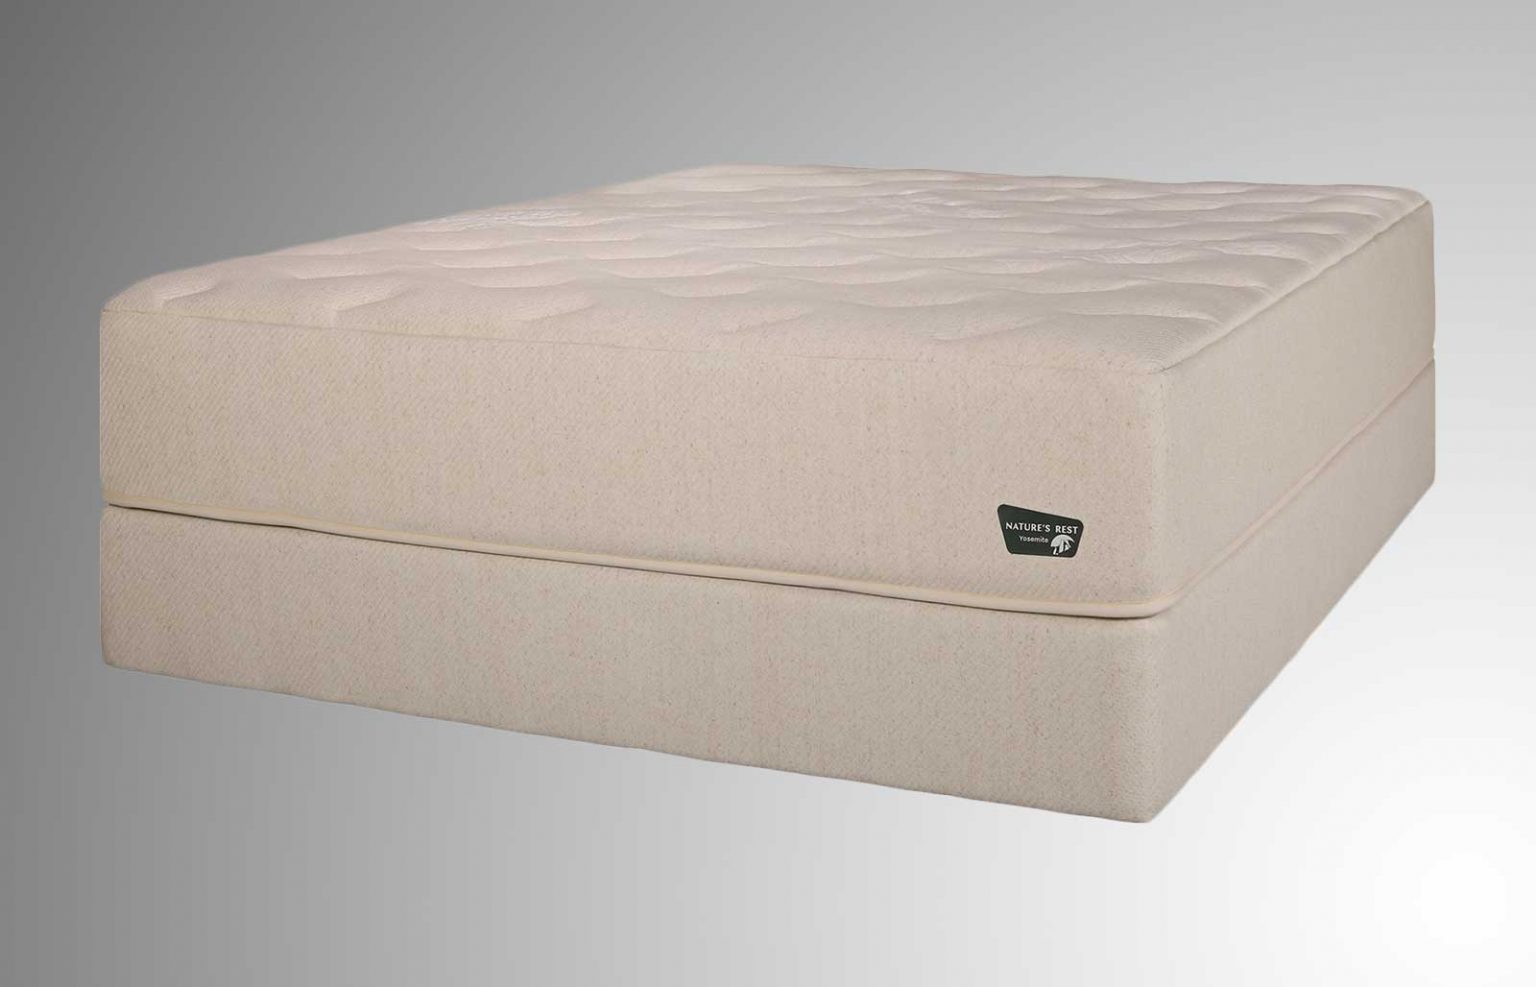 Nature's Rest FM-PL Mattress and Foundation Angle View